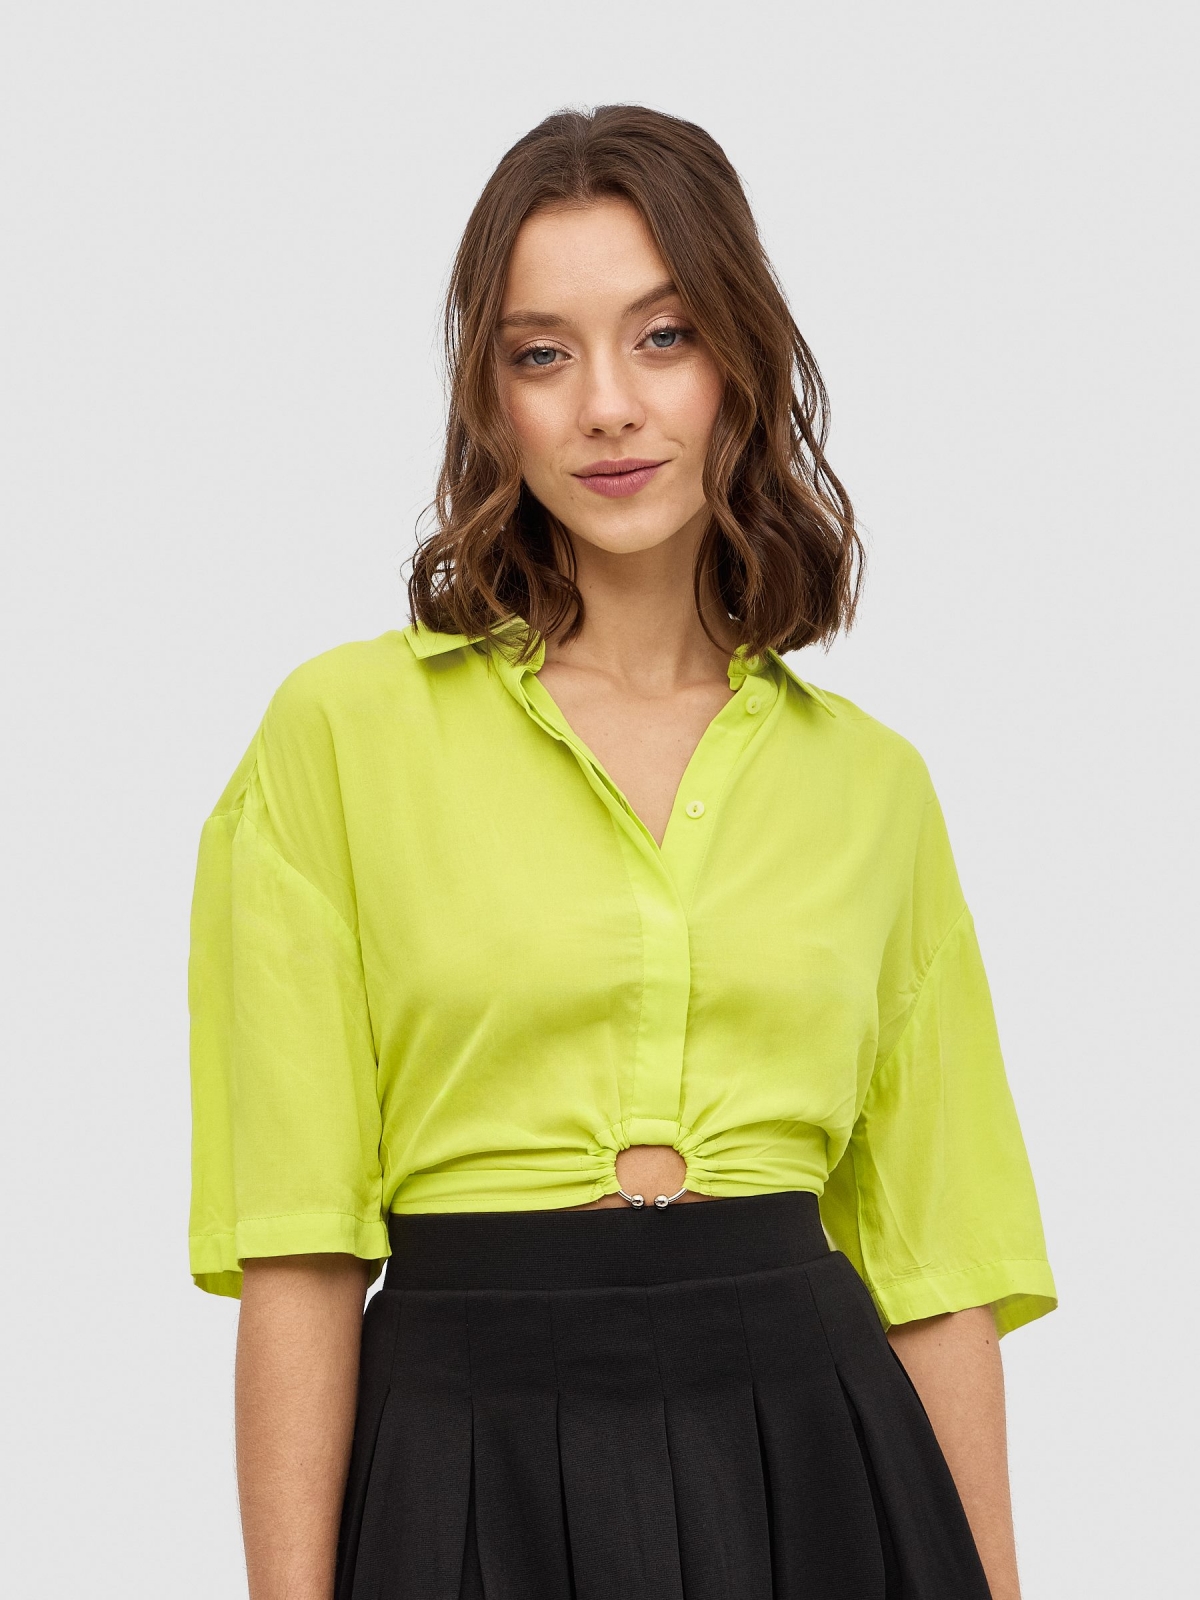 Crop ring shirt lime middle front view